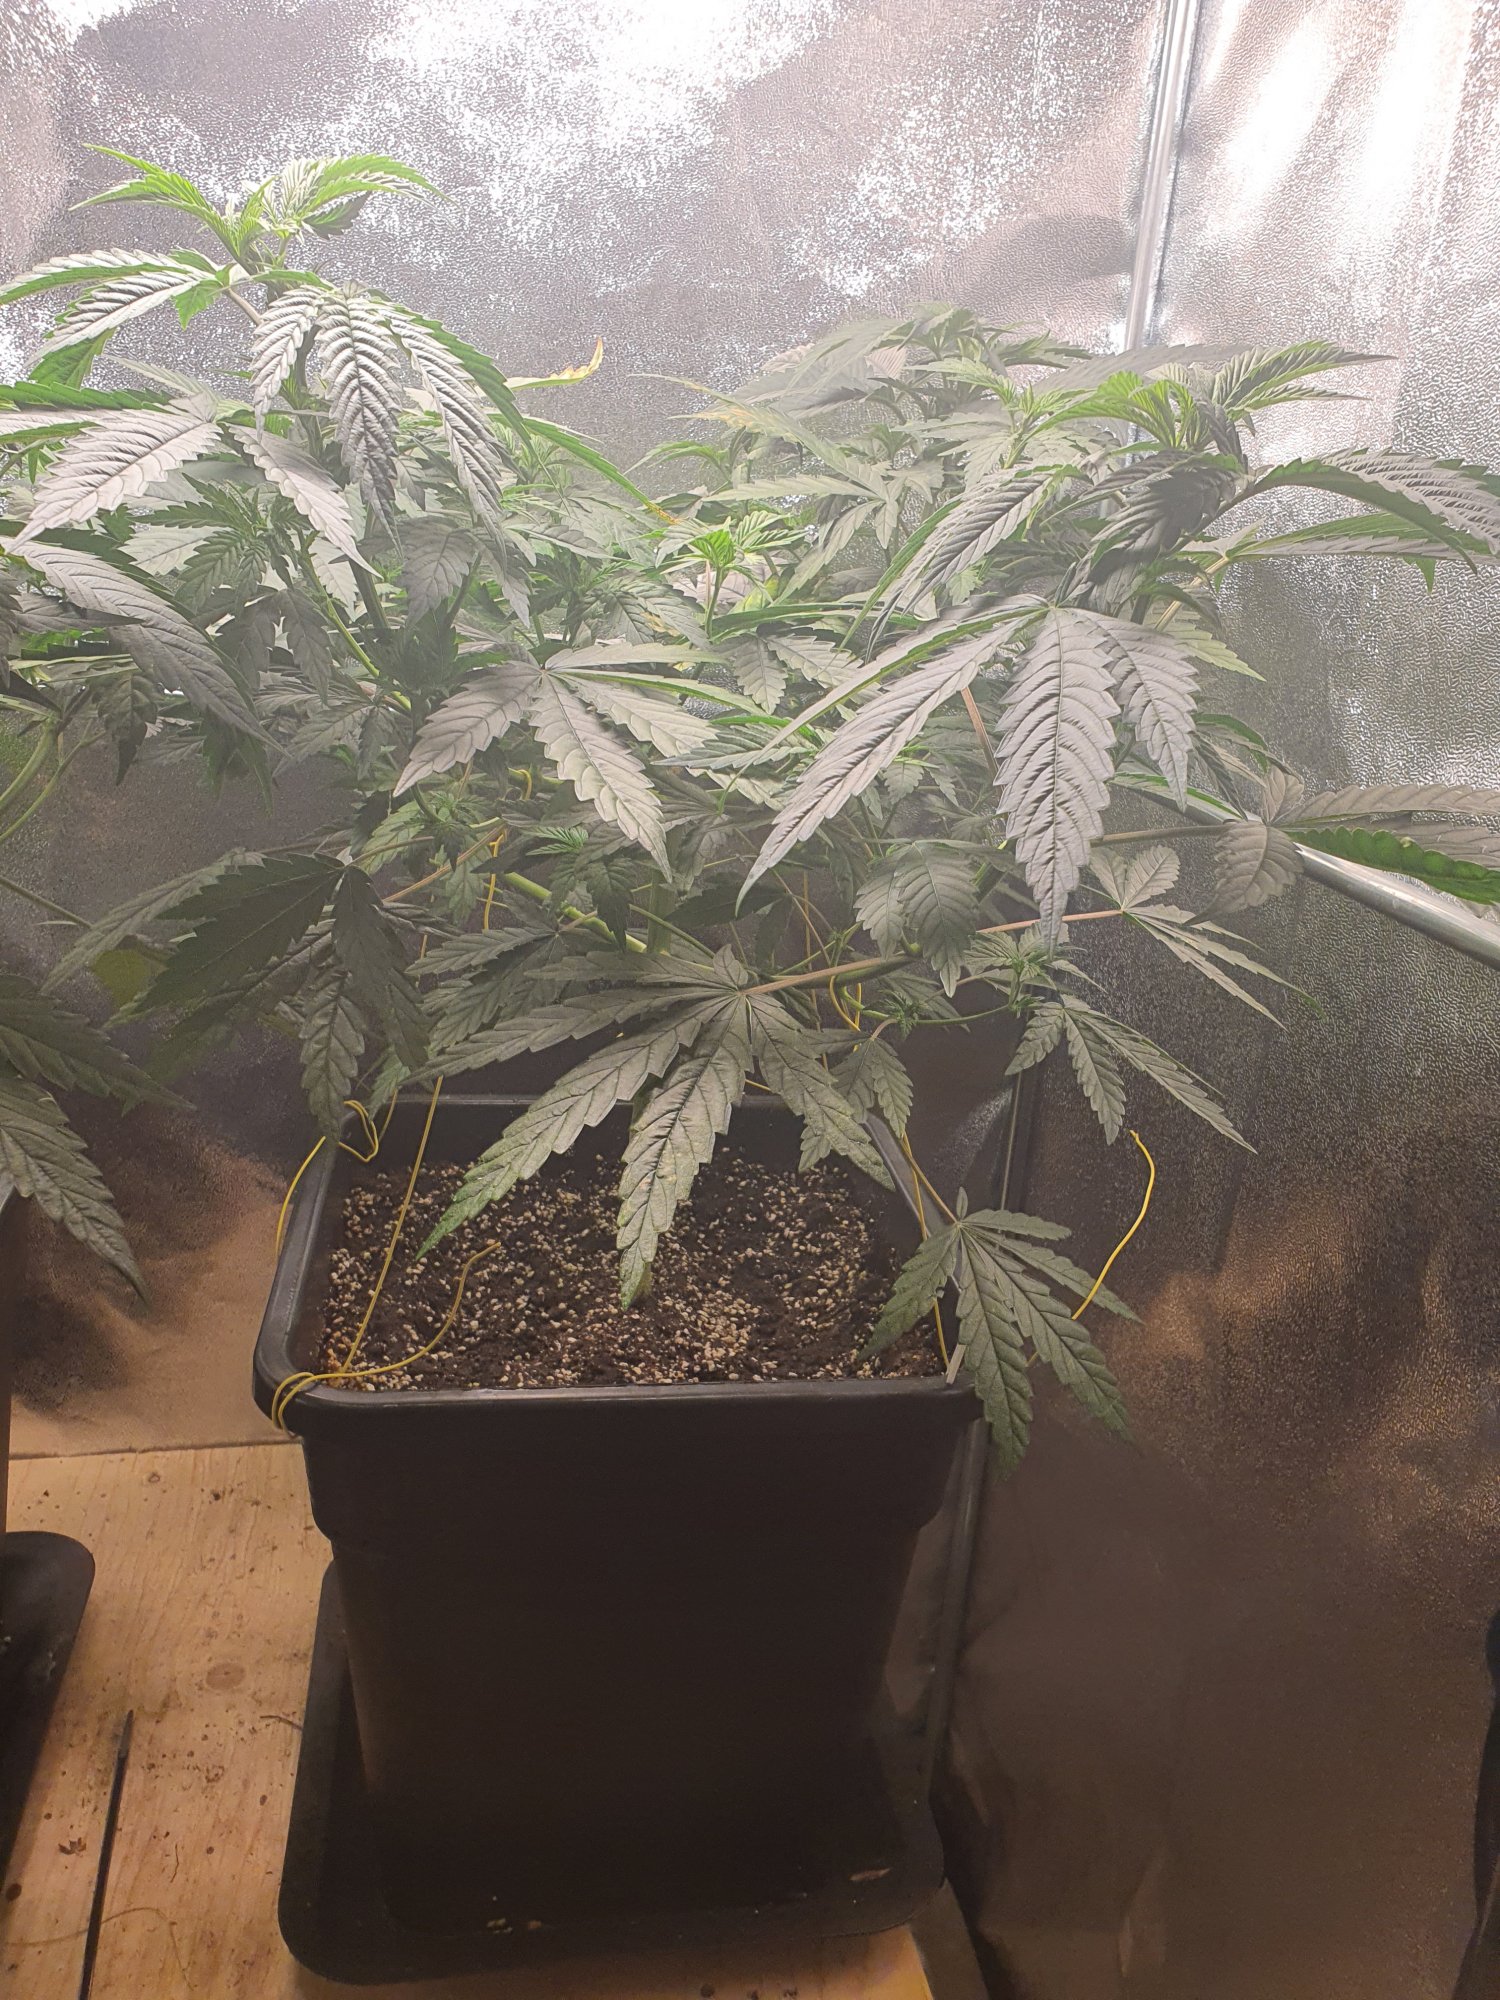 Nutrient deficiency king tut and gg4 only tut has problems